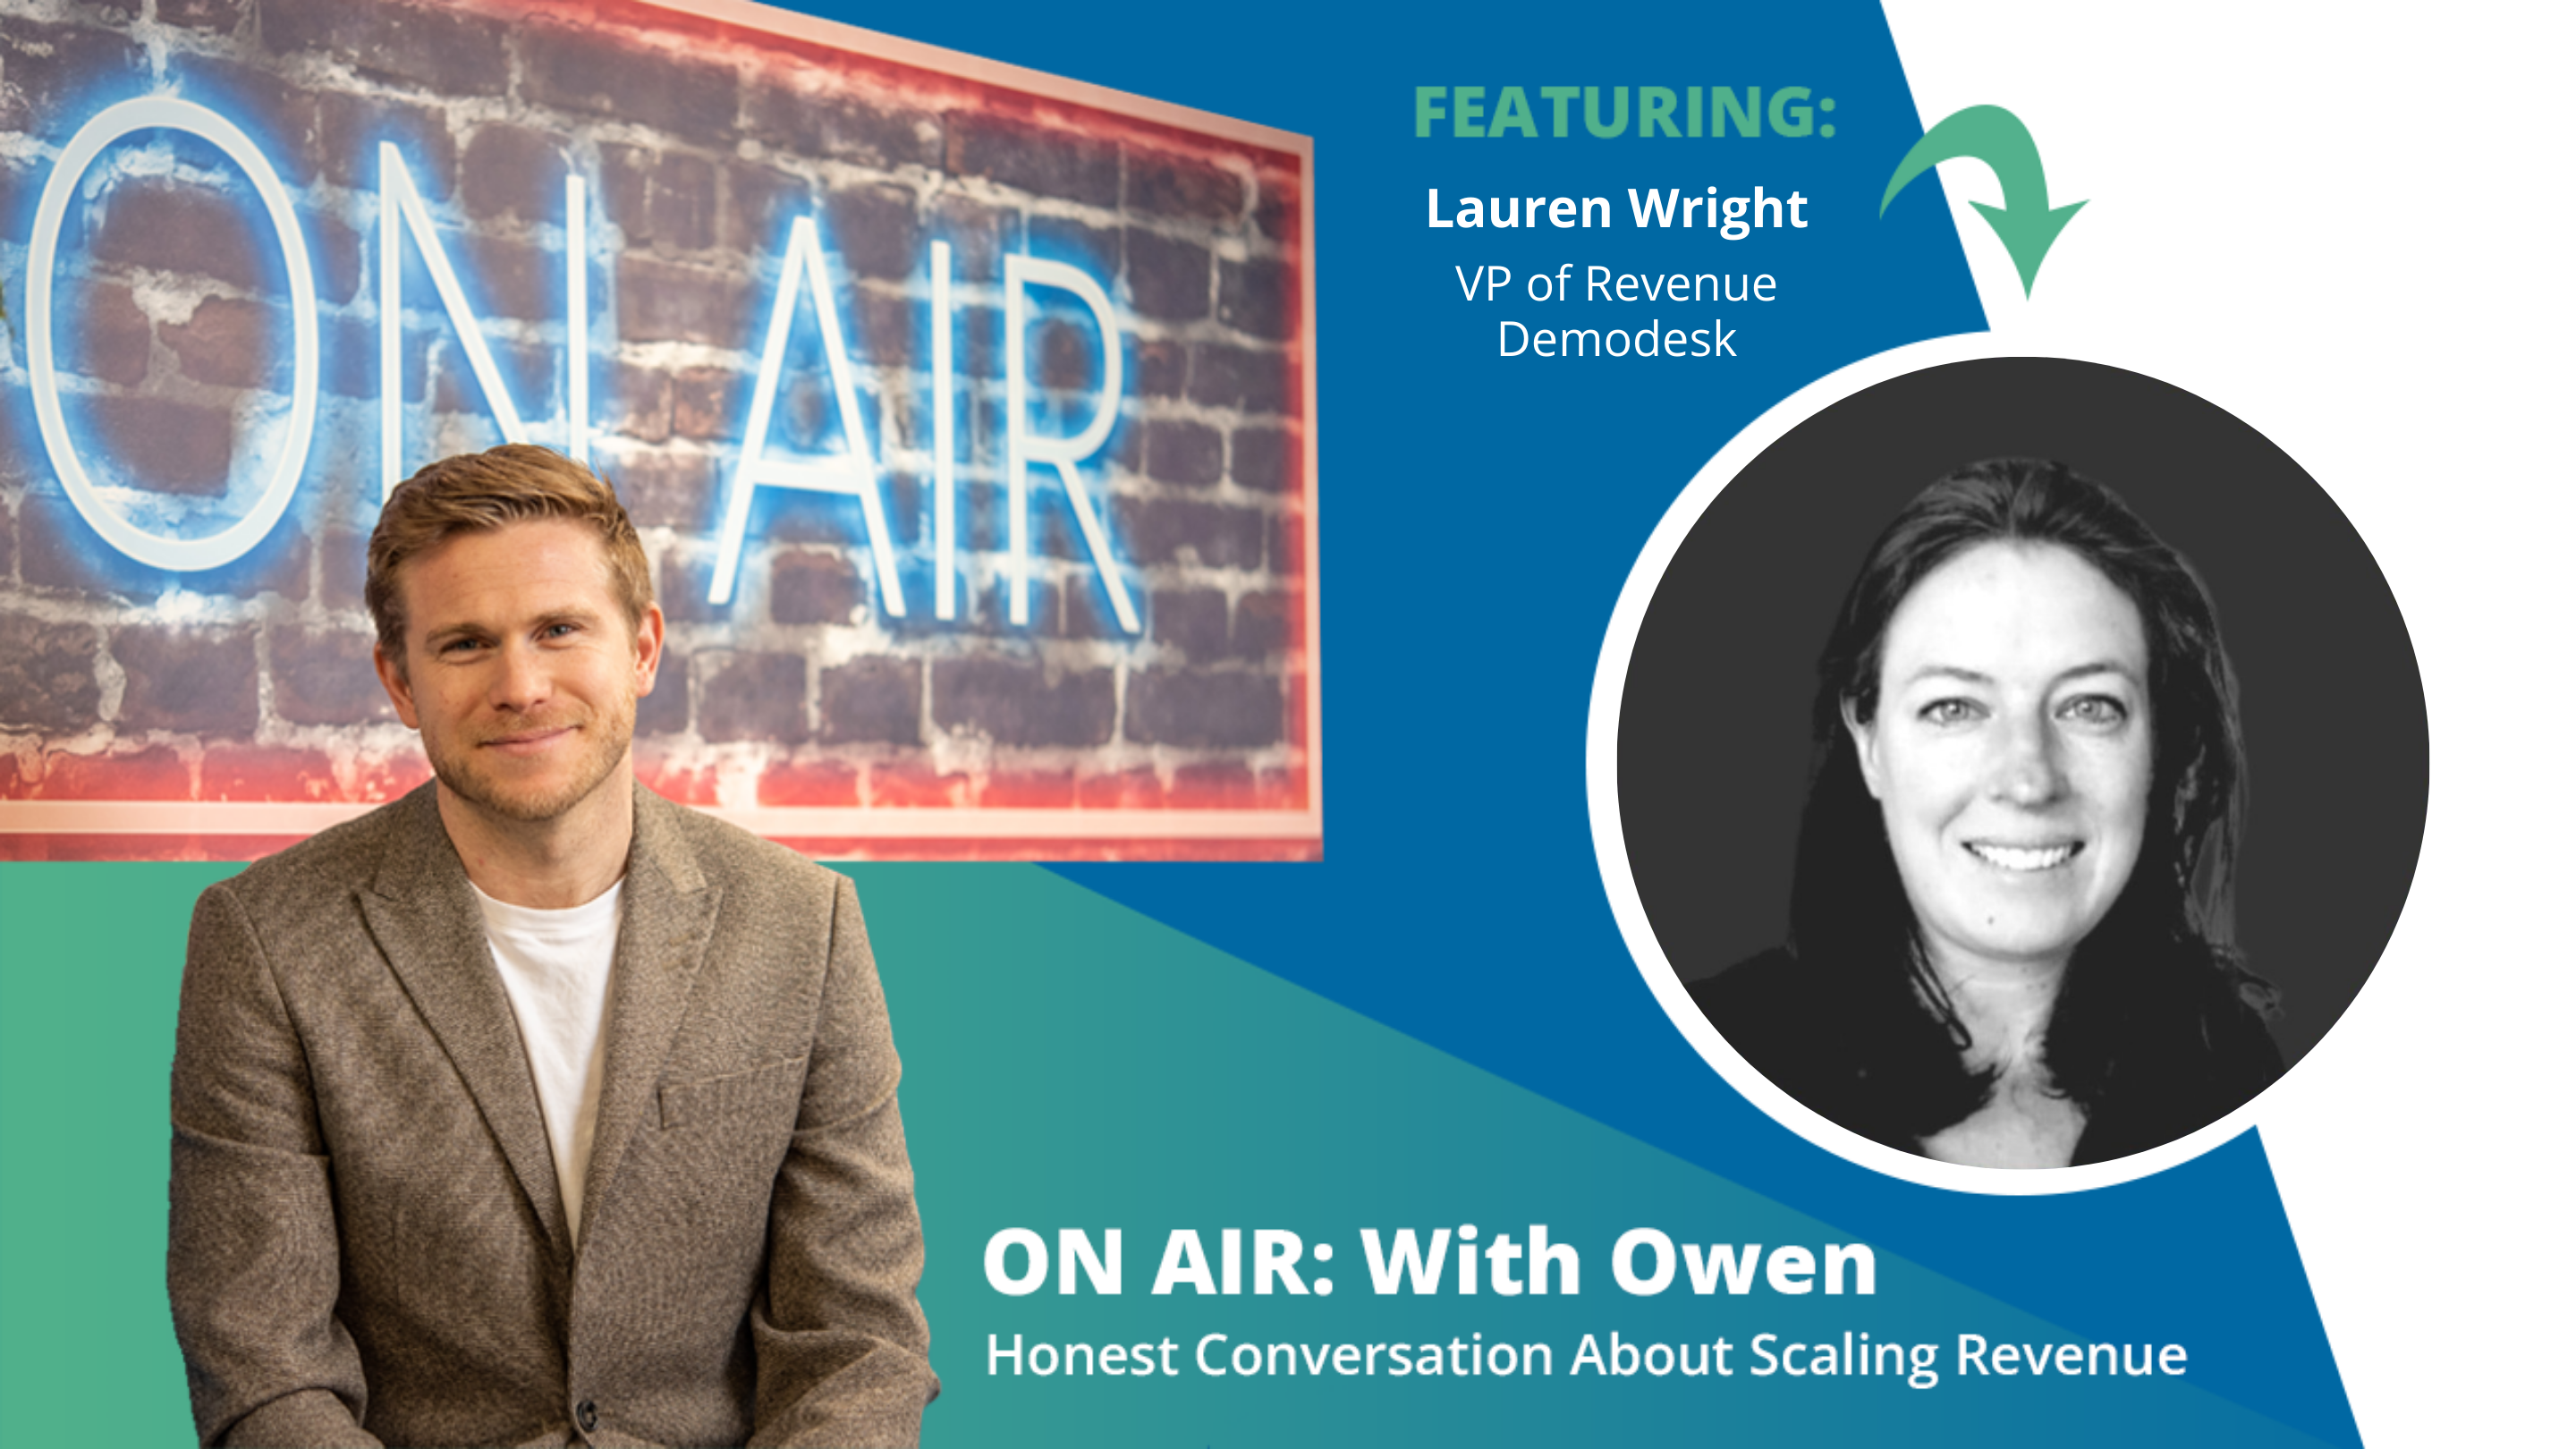 ON AIR: With Owen Episode 52 Featuring Lauren Wright – VP of Revenue at Demodesk